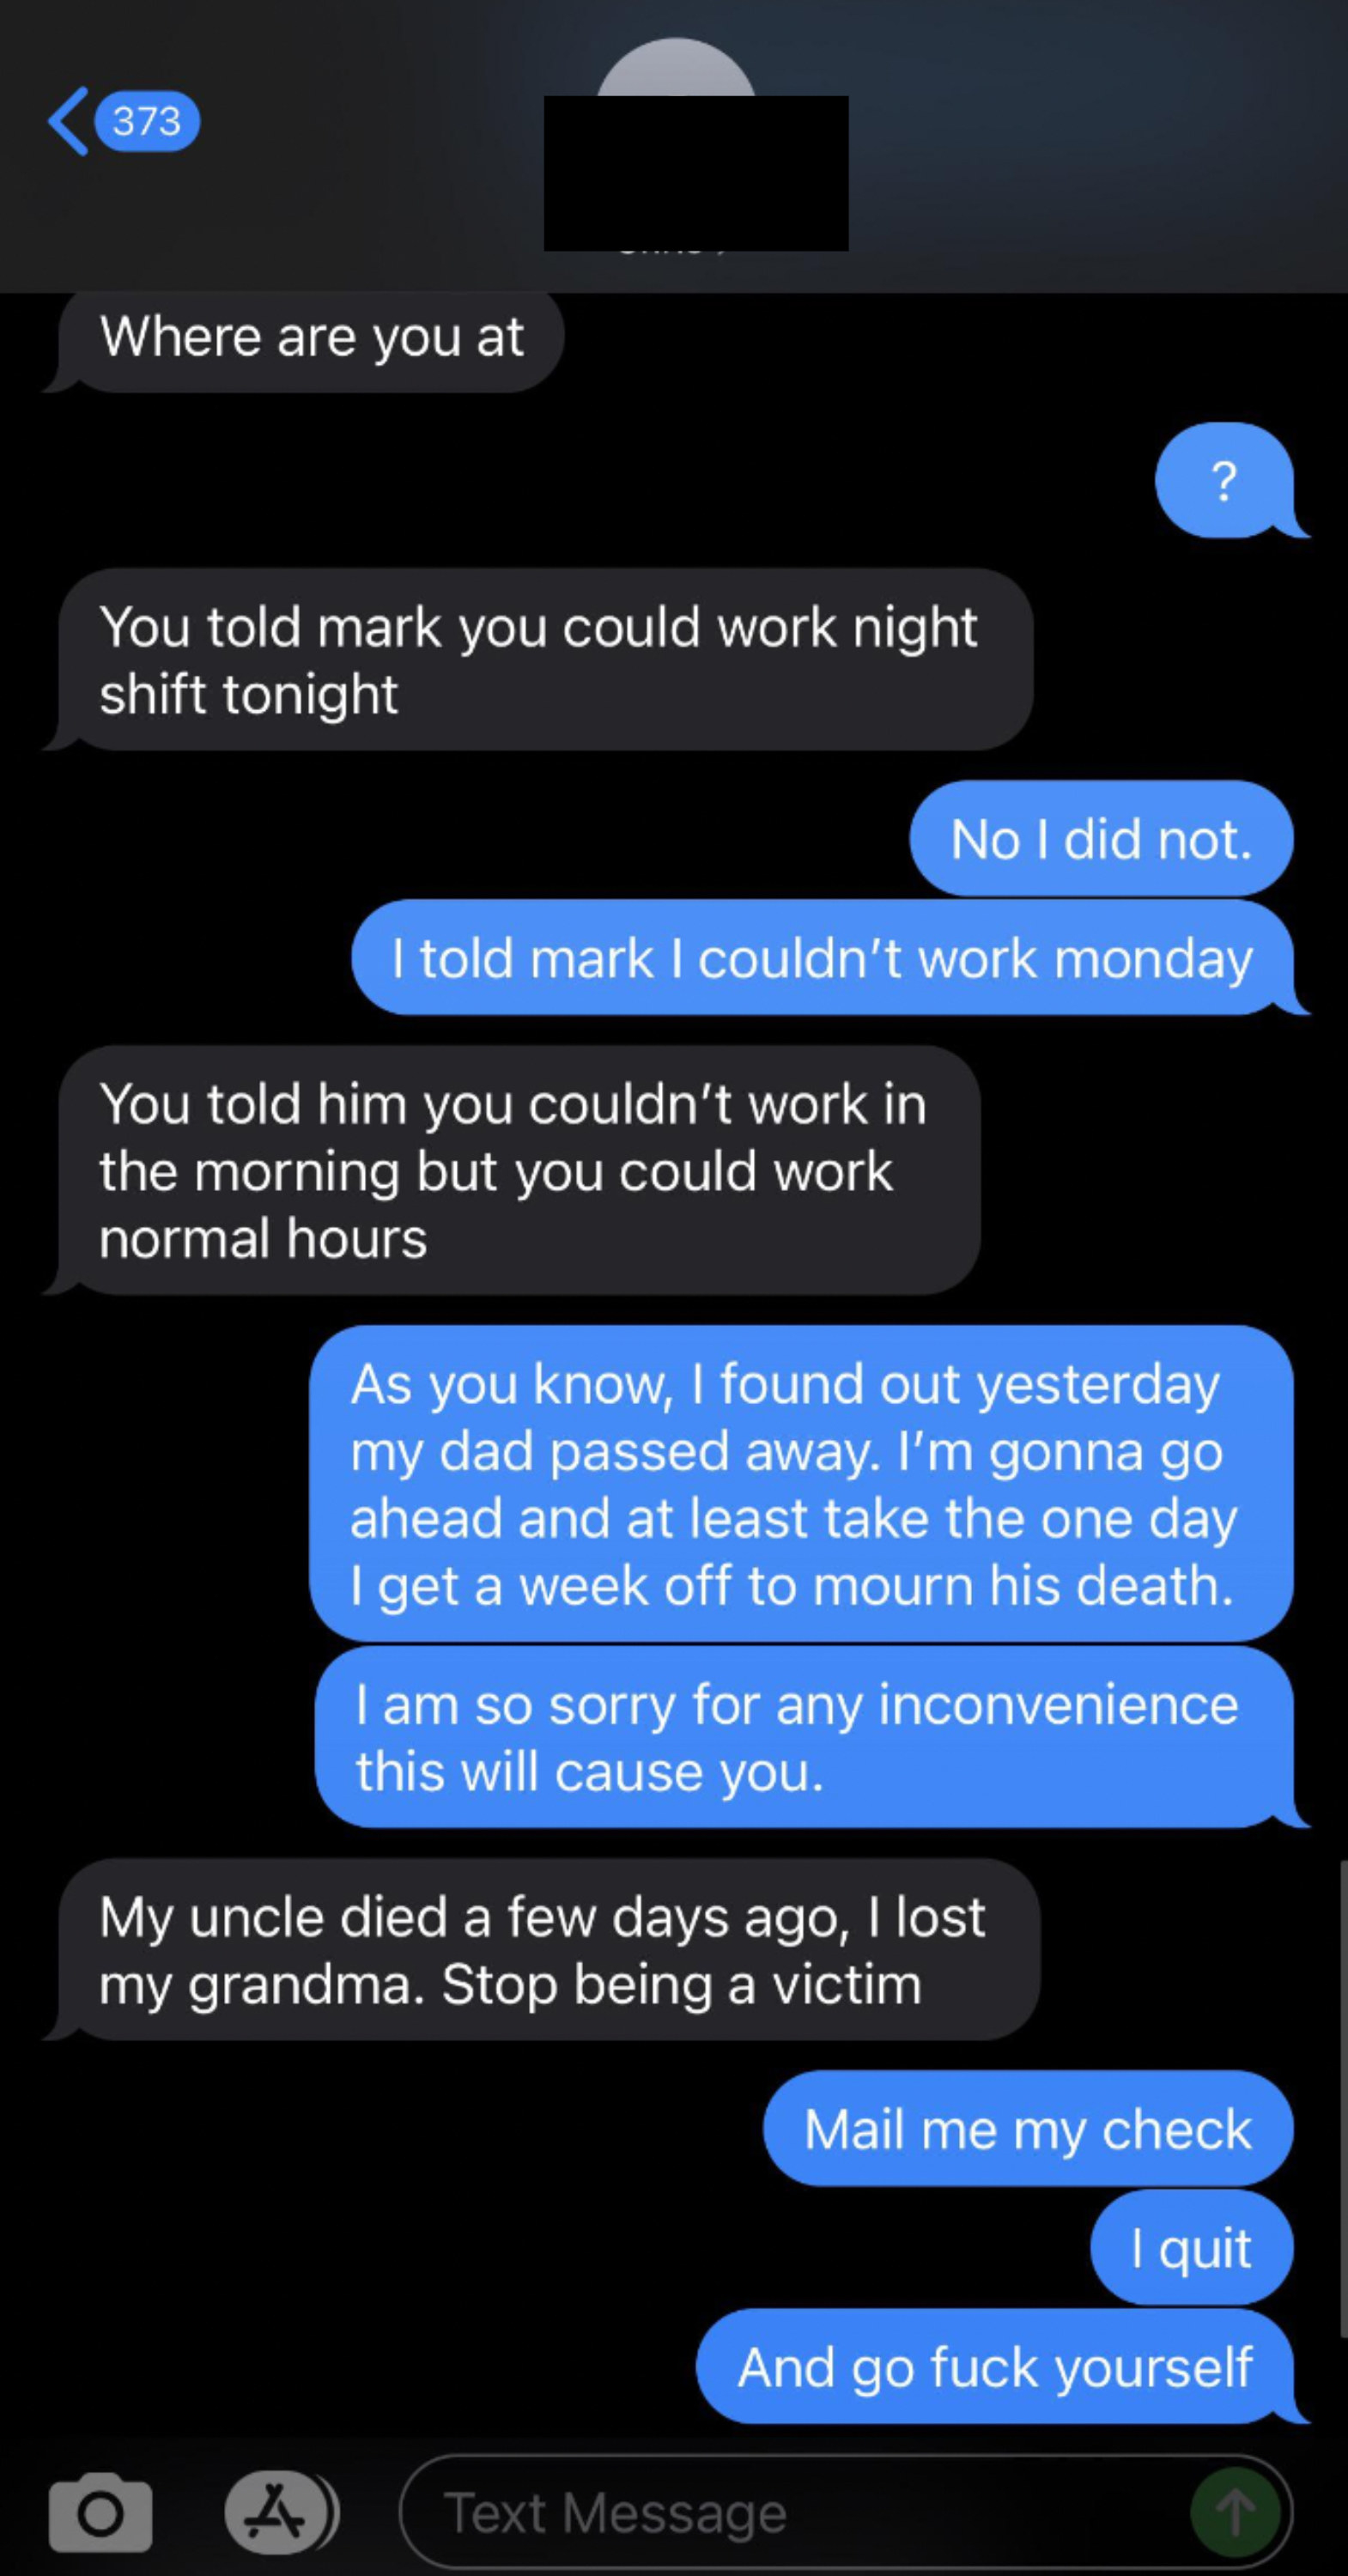 A worker asks their boss for time off after their dad died. The boss replies &#x27;my uncle died a few days ago, stop being a victim&#x27;